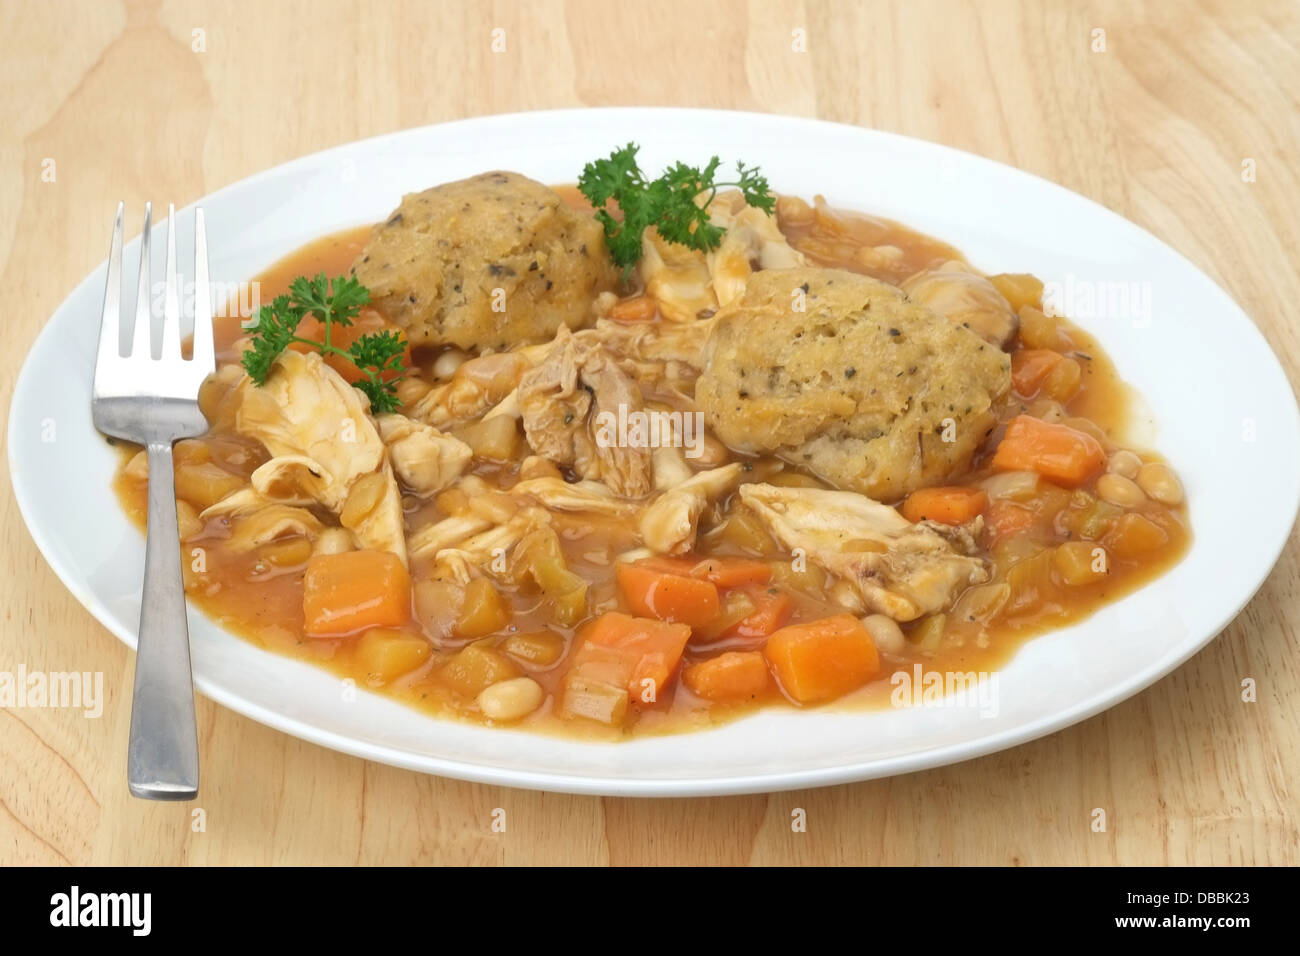 Chicken and vegetable casserole with sage and onion dumplings Stock Photo